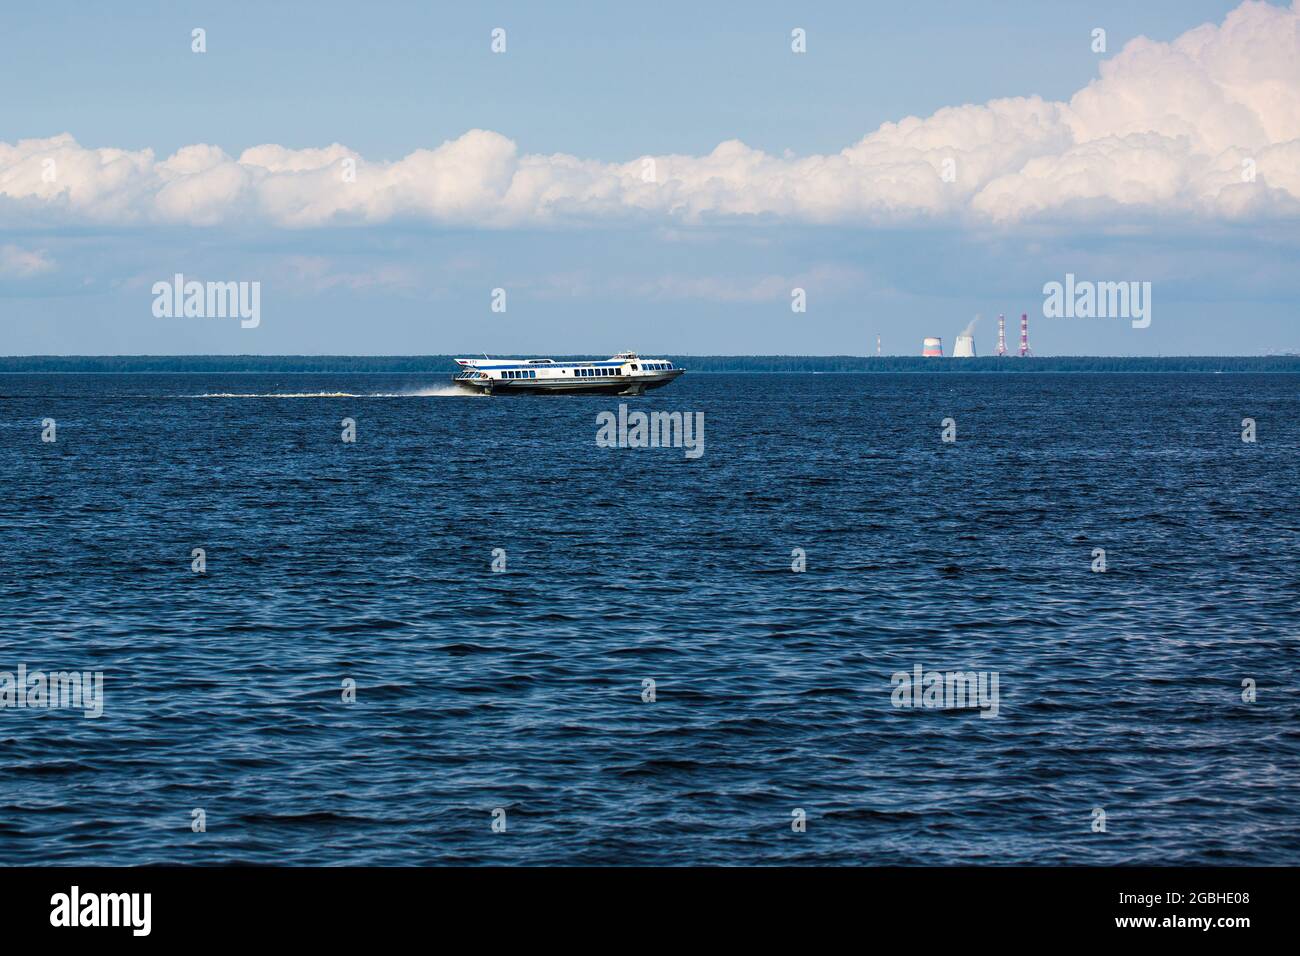 Saint-Petersburg, Russia - July 09 2021: Meteor, hydrofoil boat in the Gulf of Finland. Stock Photo